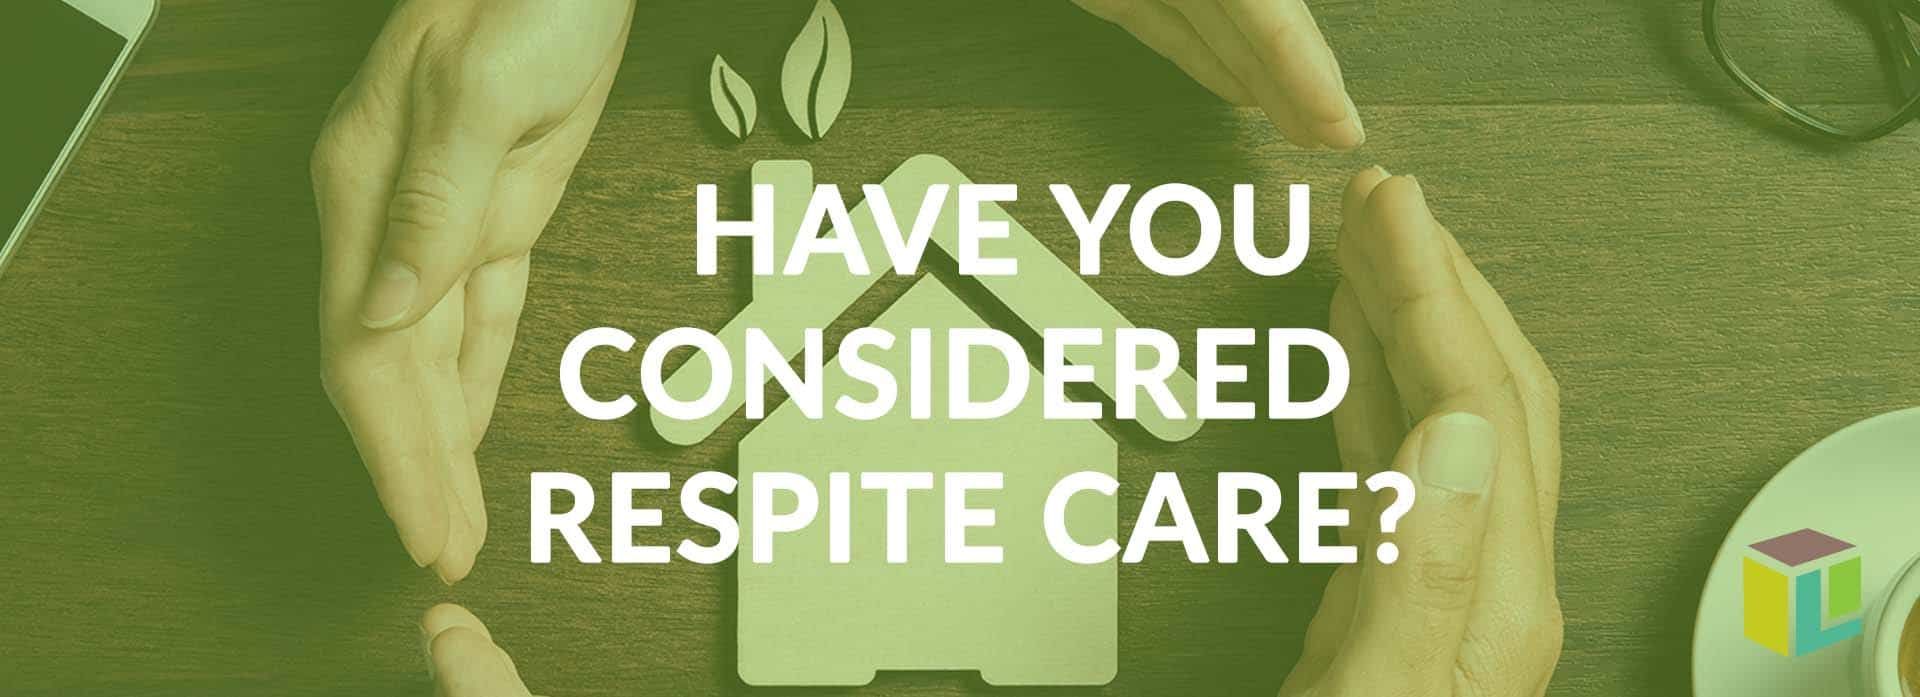 Have You Considered Respite Care? Have You Considered Respite Care? Have You Considered Respite Care? Have You Considered Respite Care?